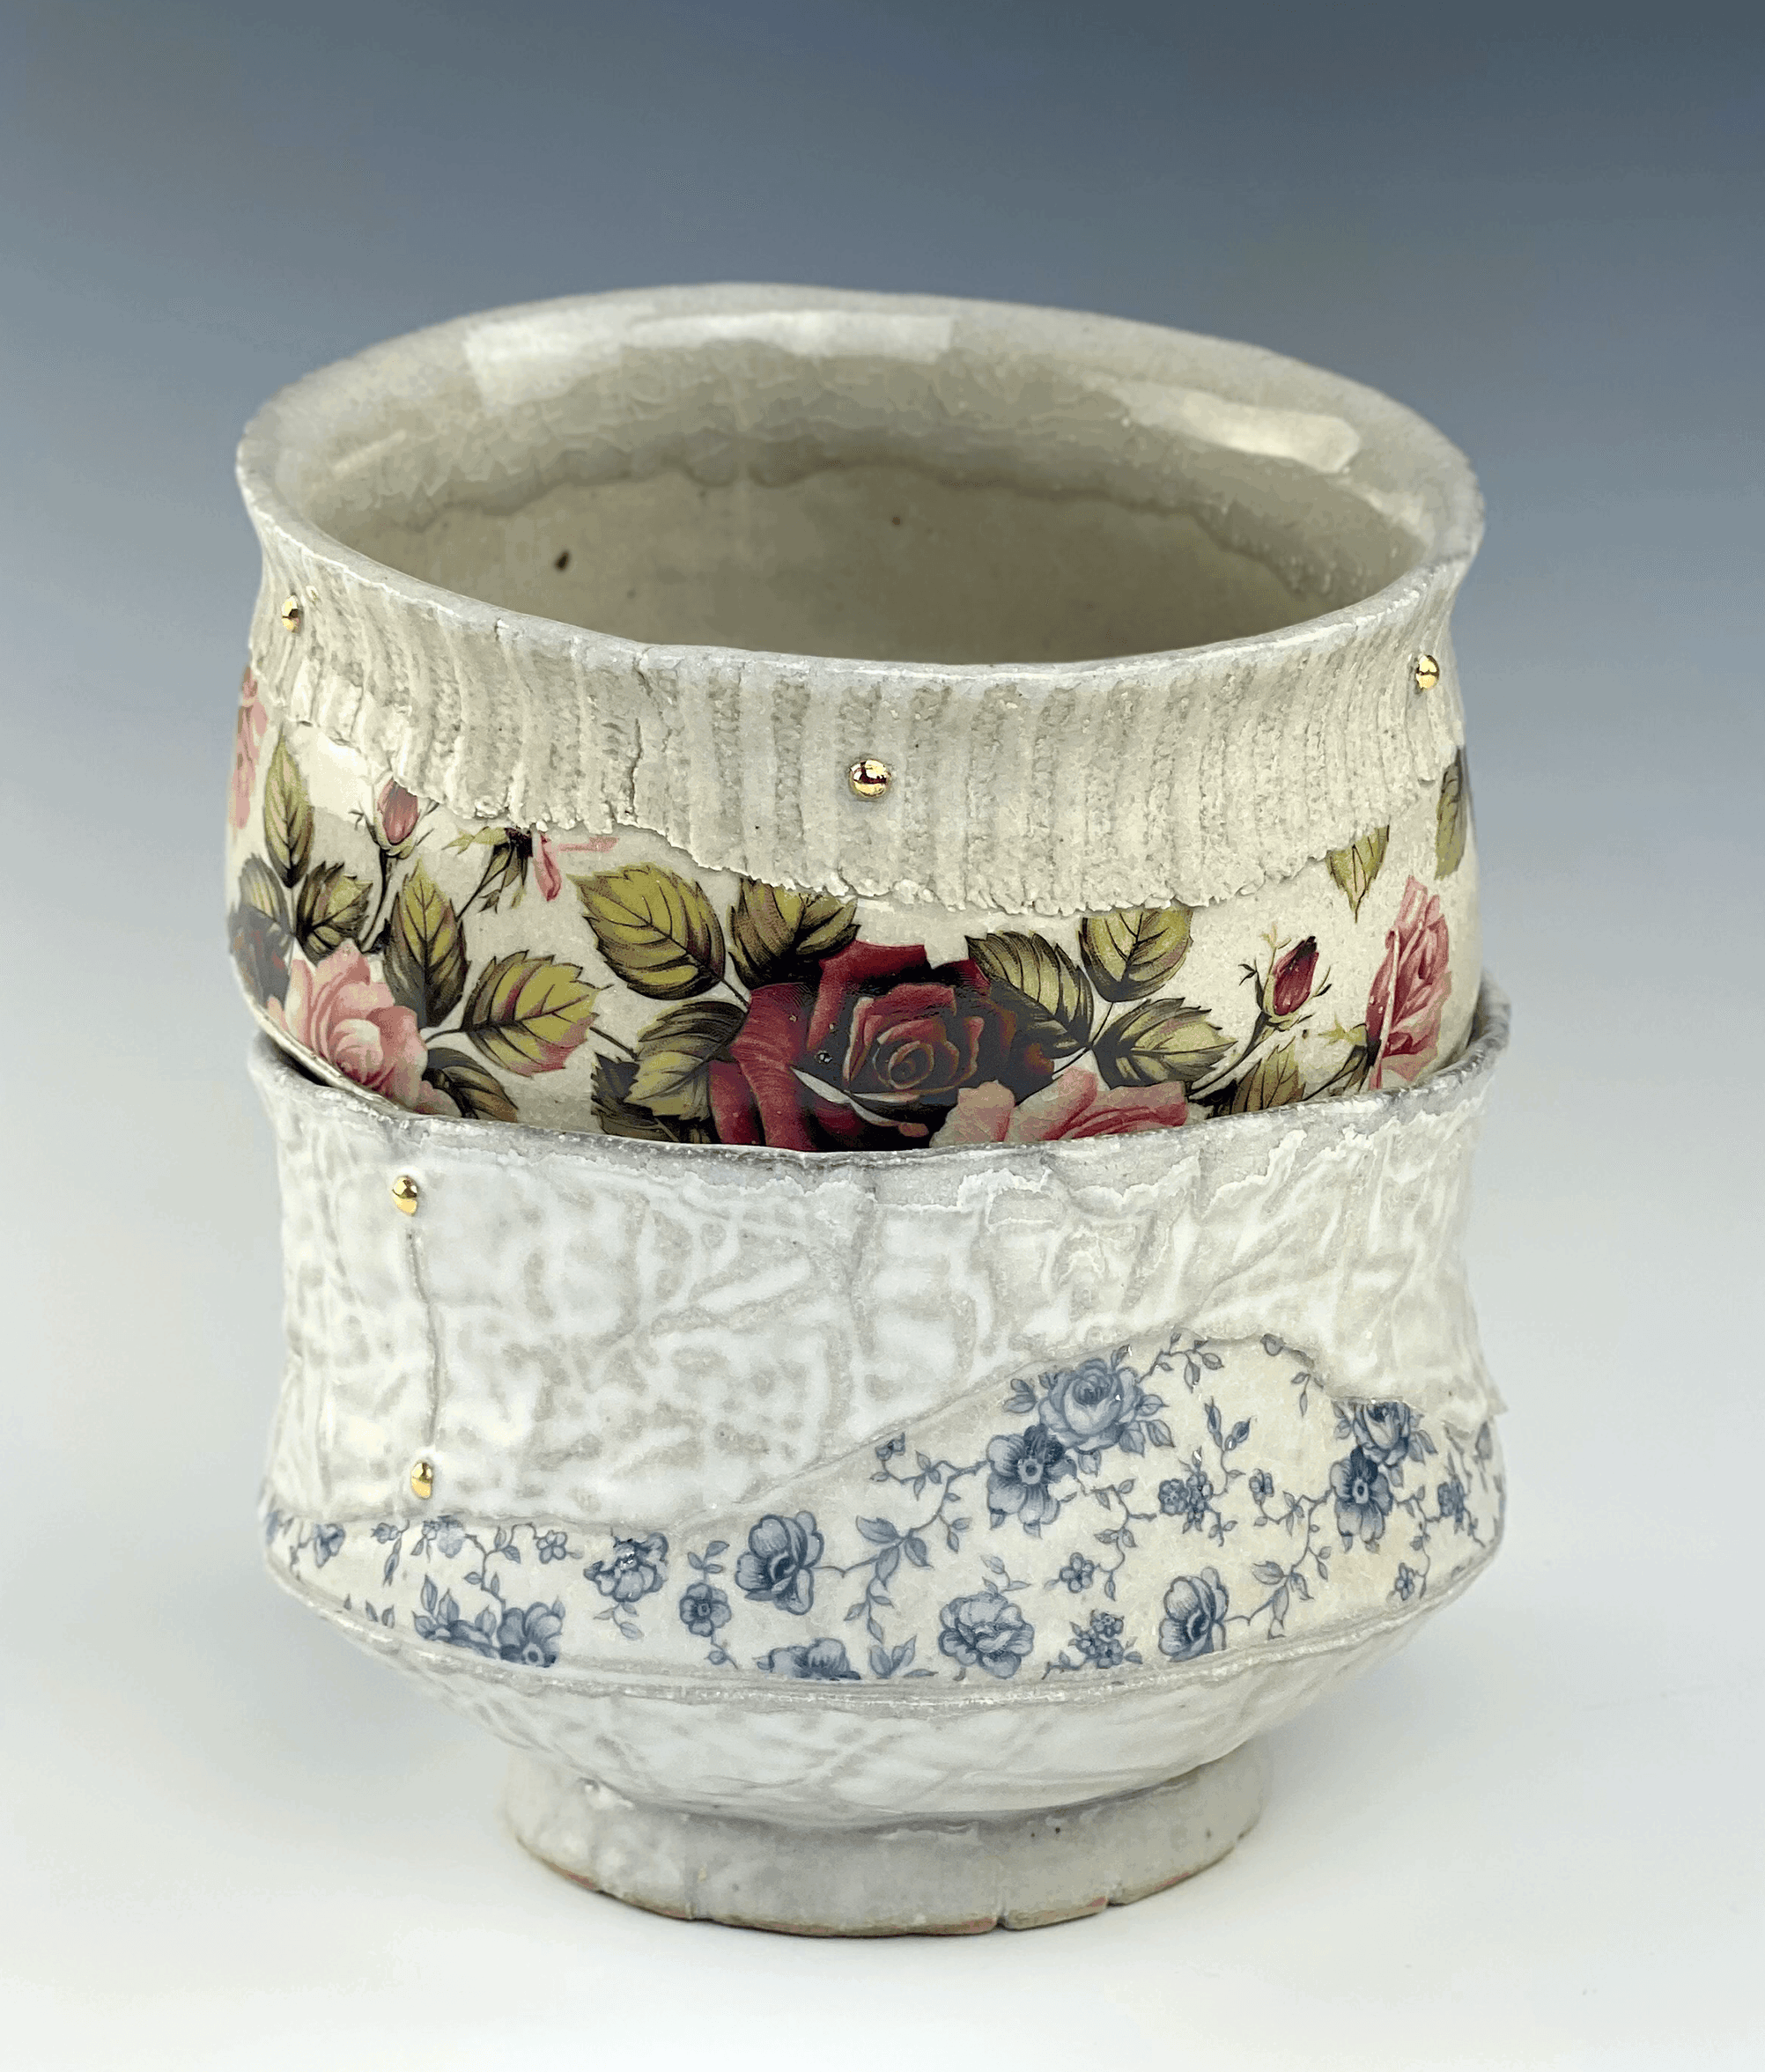 Two ceramic bowls are stacked on top of each other. The bottom bowl has small blue floral details and fiber texture. The top bowl has green and red flower details with a corduroy texture around the rim.